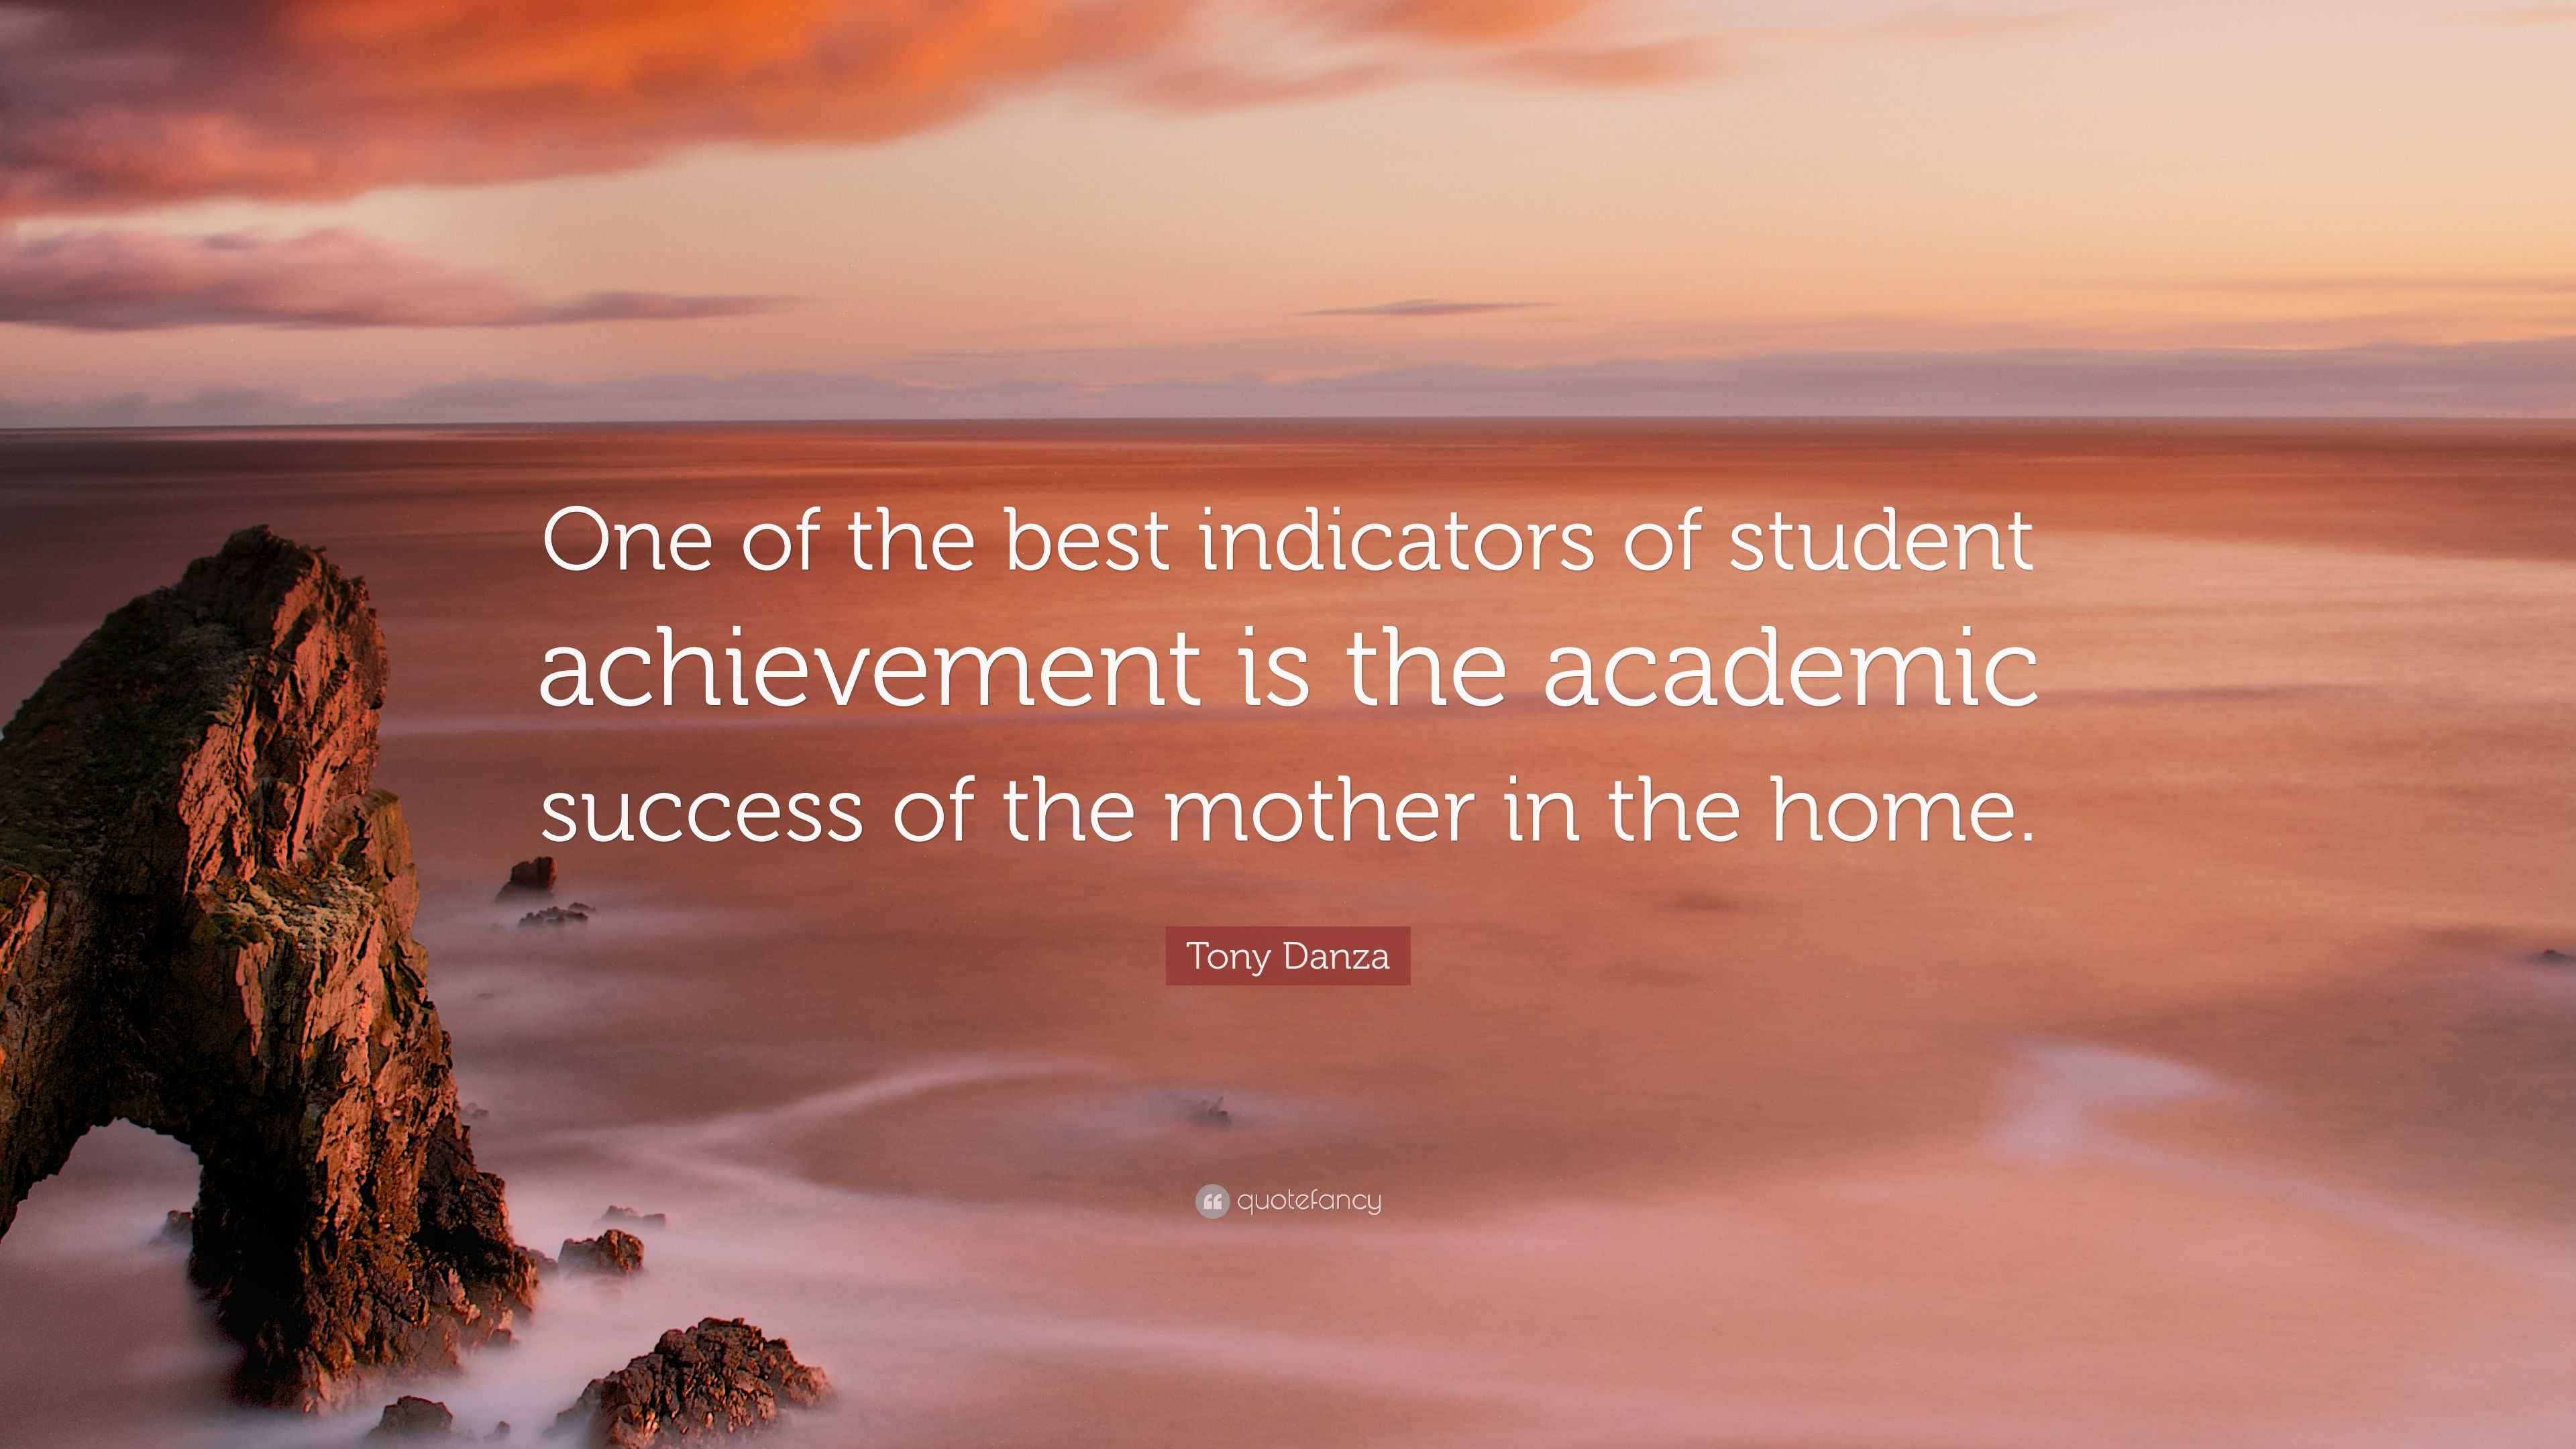 Tony Danza Quote: “One of the best indicators of student achievement is